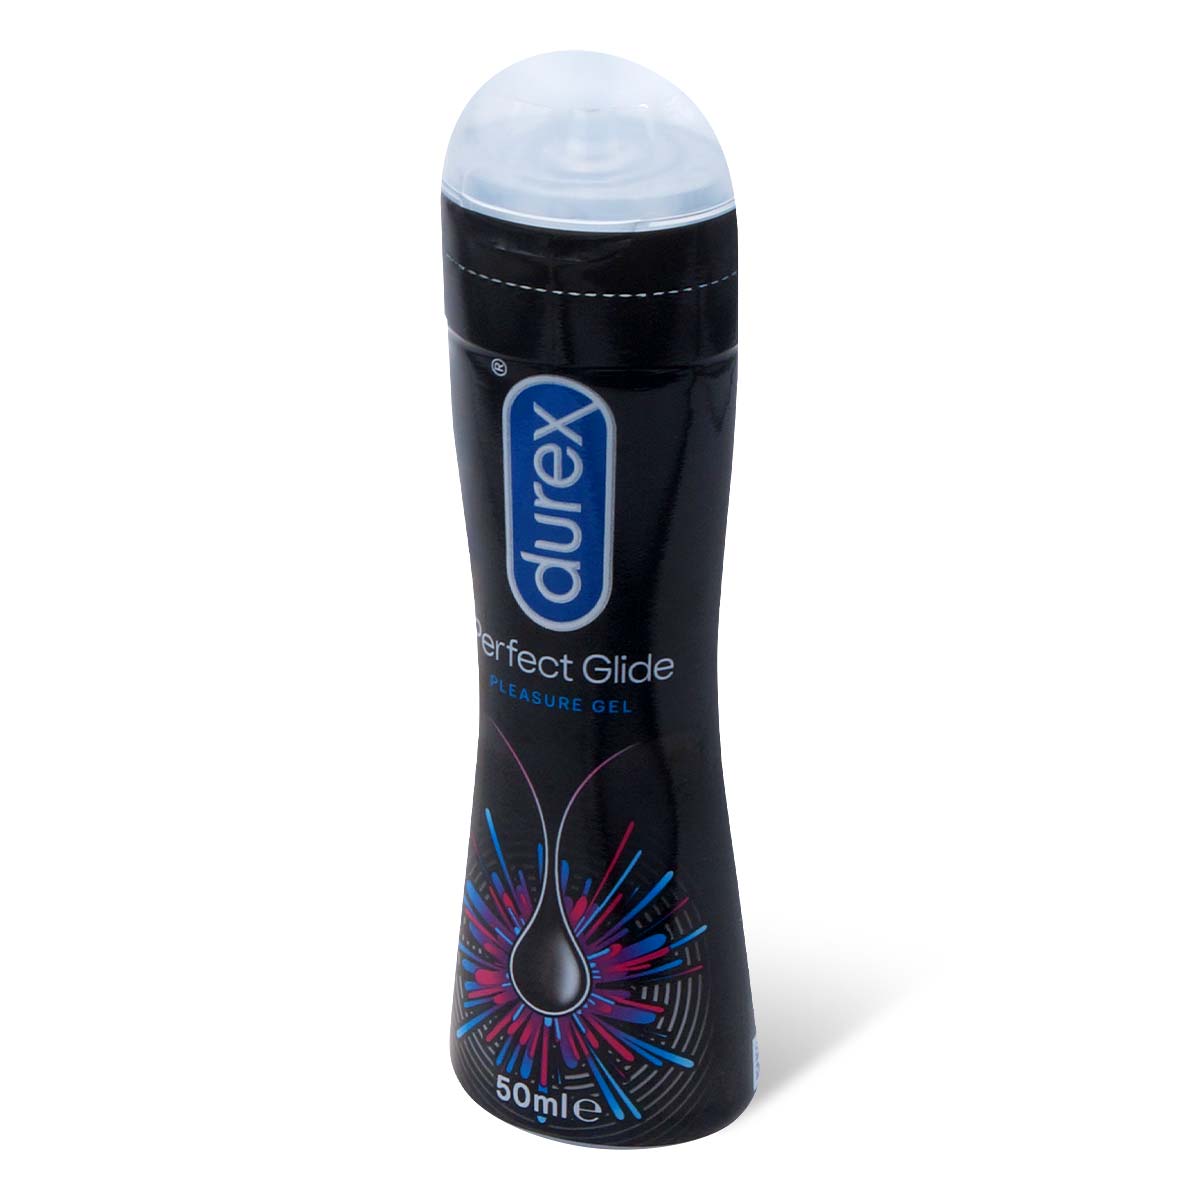 Durex Perfect Glide 50ml Silicone-based Lubricant-p_1